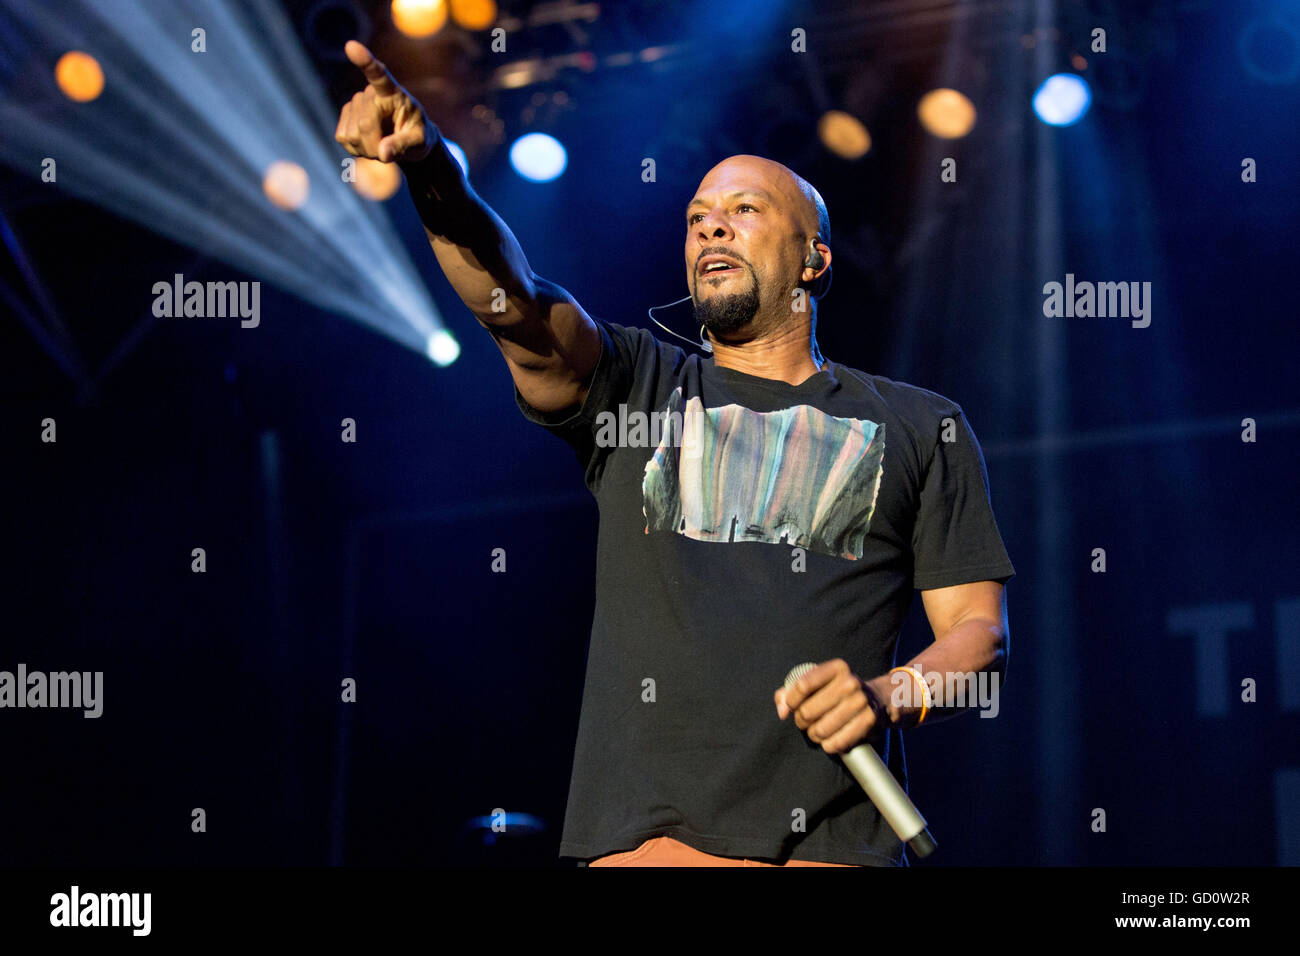 Milwaukee, Wisconsin, USA. 8th July, 2016. Rapper COMMON (aka LONNIE RASHID LYNN, JR.)performs live at Henry Maier Festival Park during Summerfest in Milwaukee, Wisconsin © Daniel DeSlover/ZUMA Wire/Alamy Live News Stock Photo